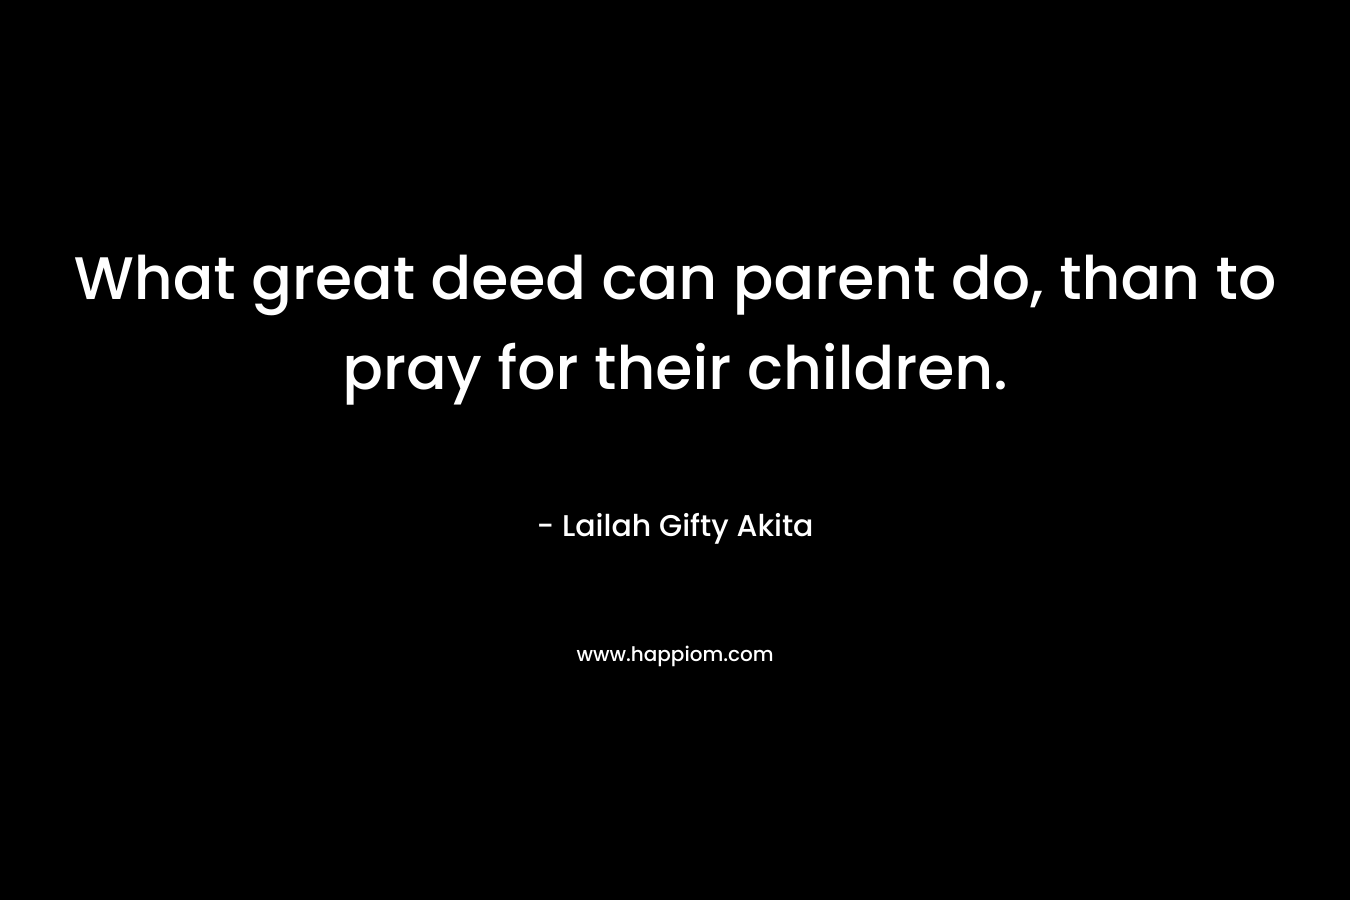 What great deed can parent do, than to pray for their children.